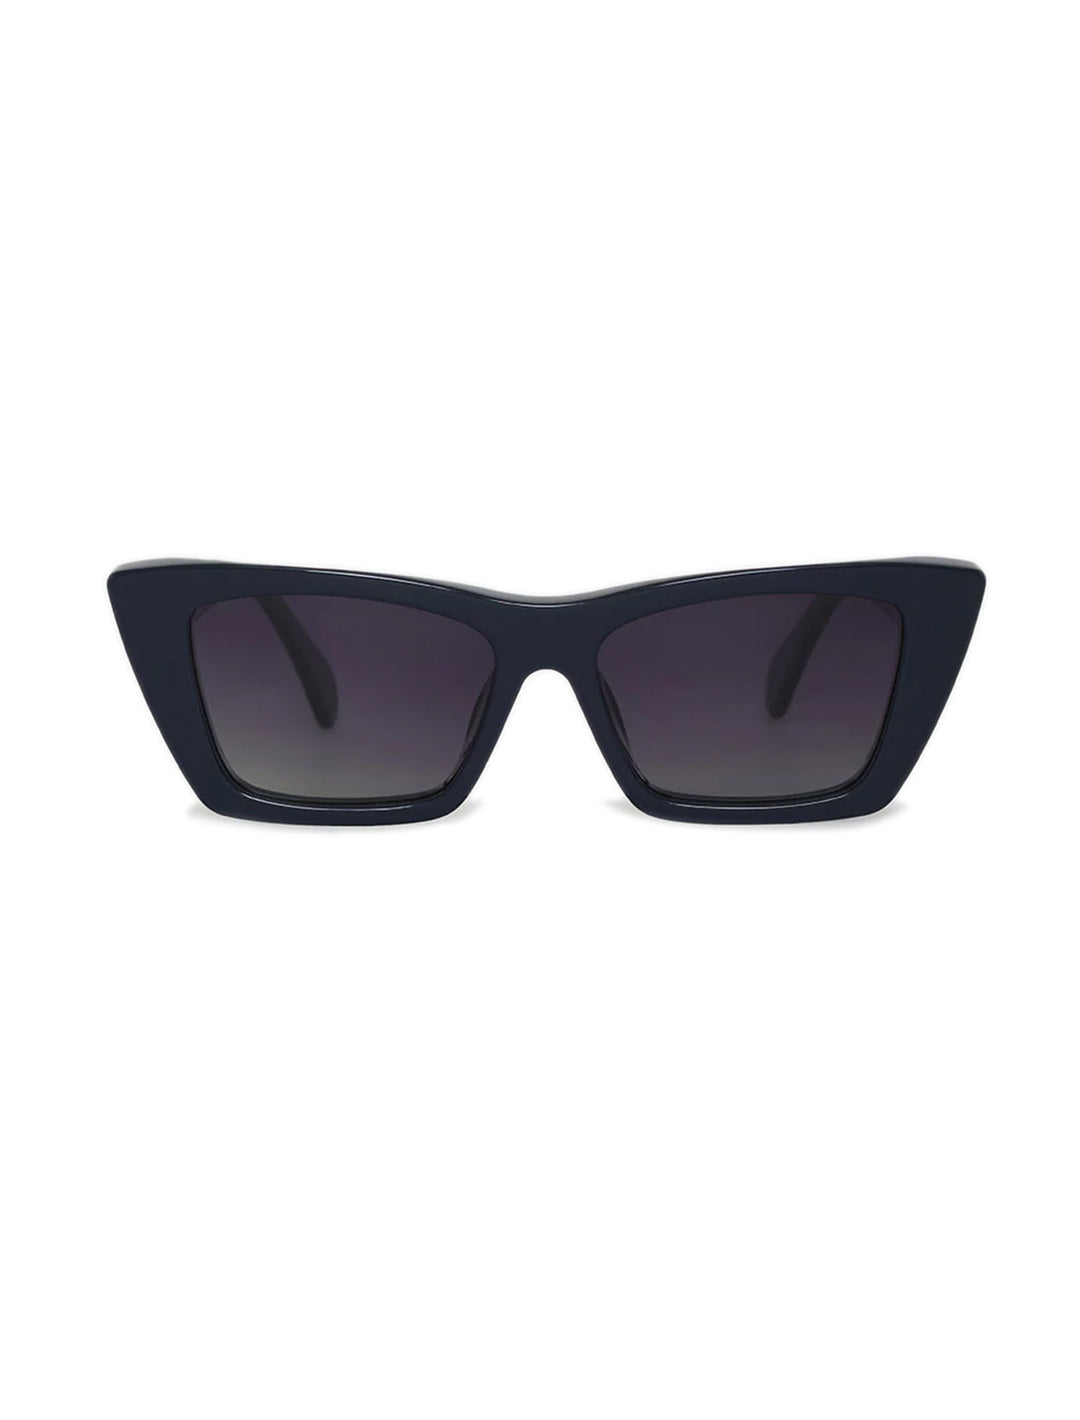 Front view of Anine Bing's levi sunglasses in navy.